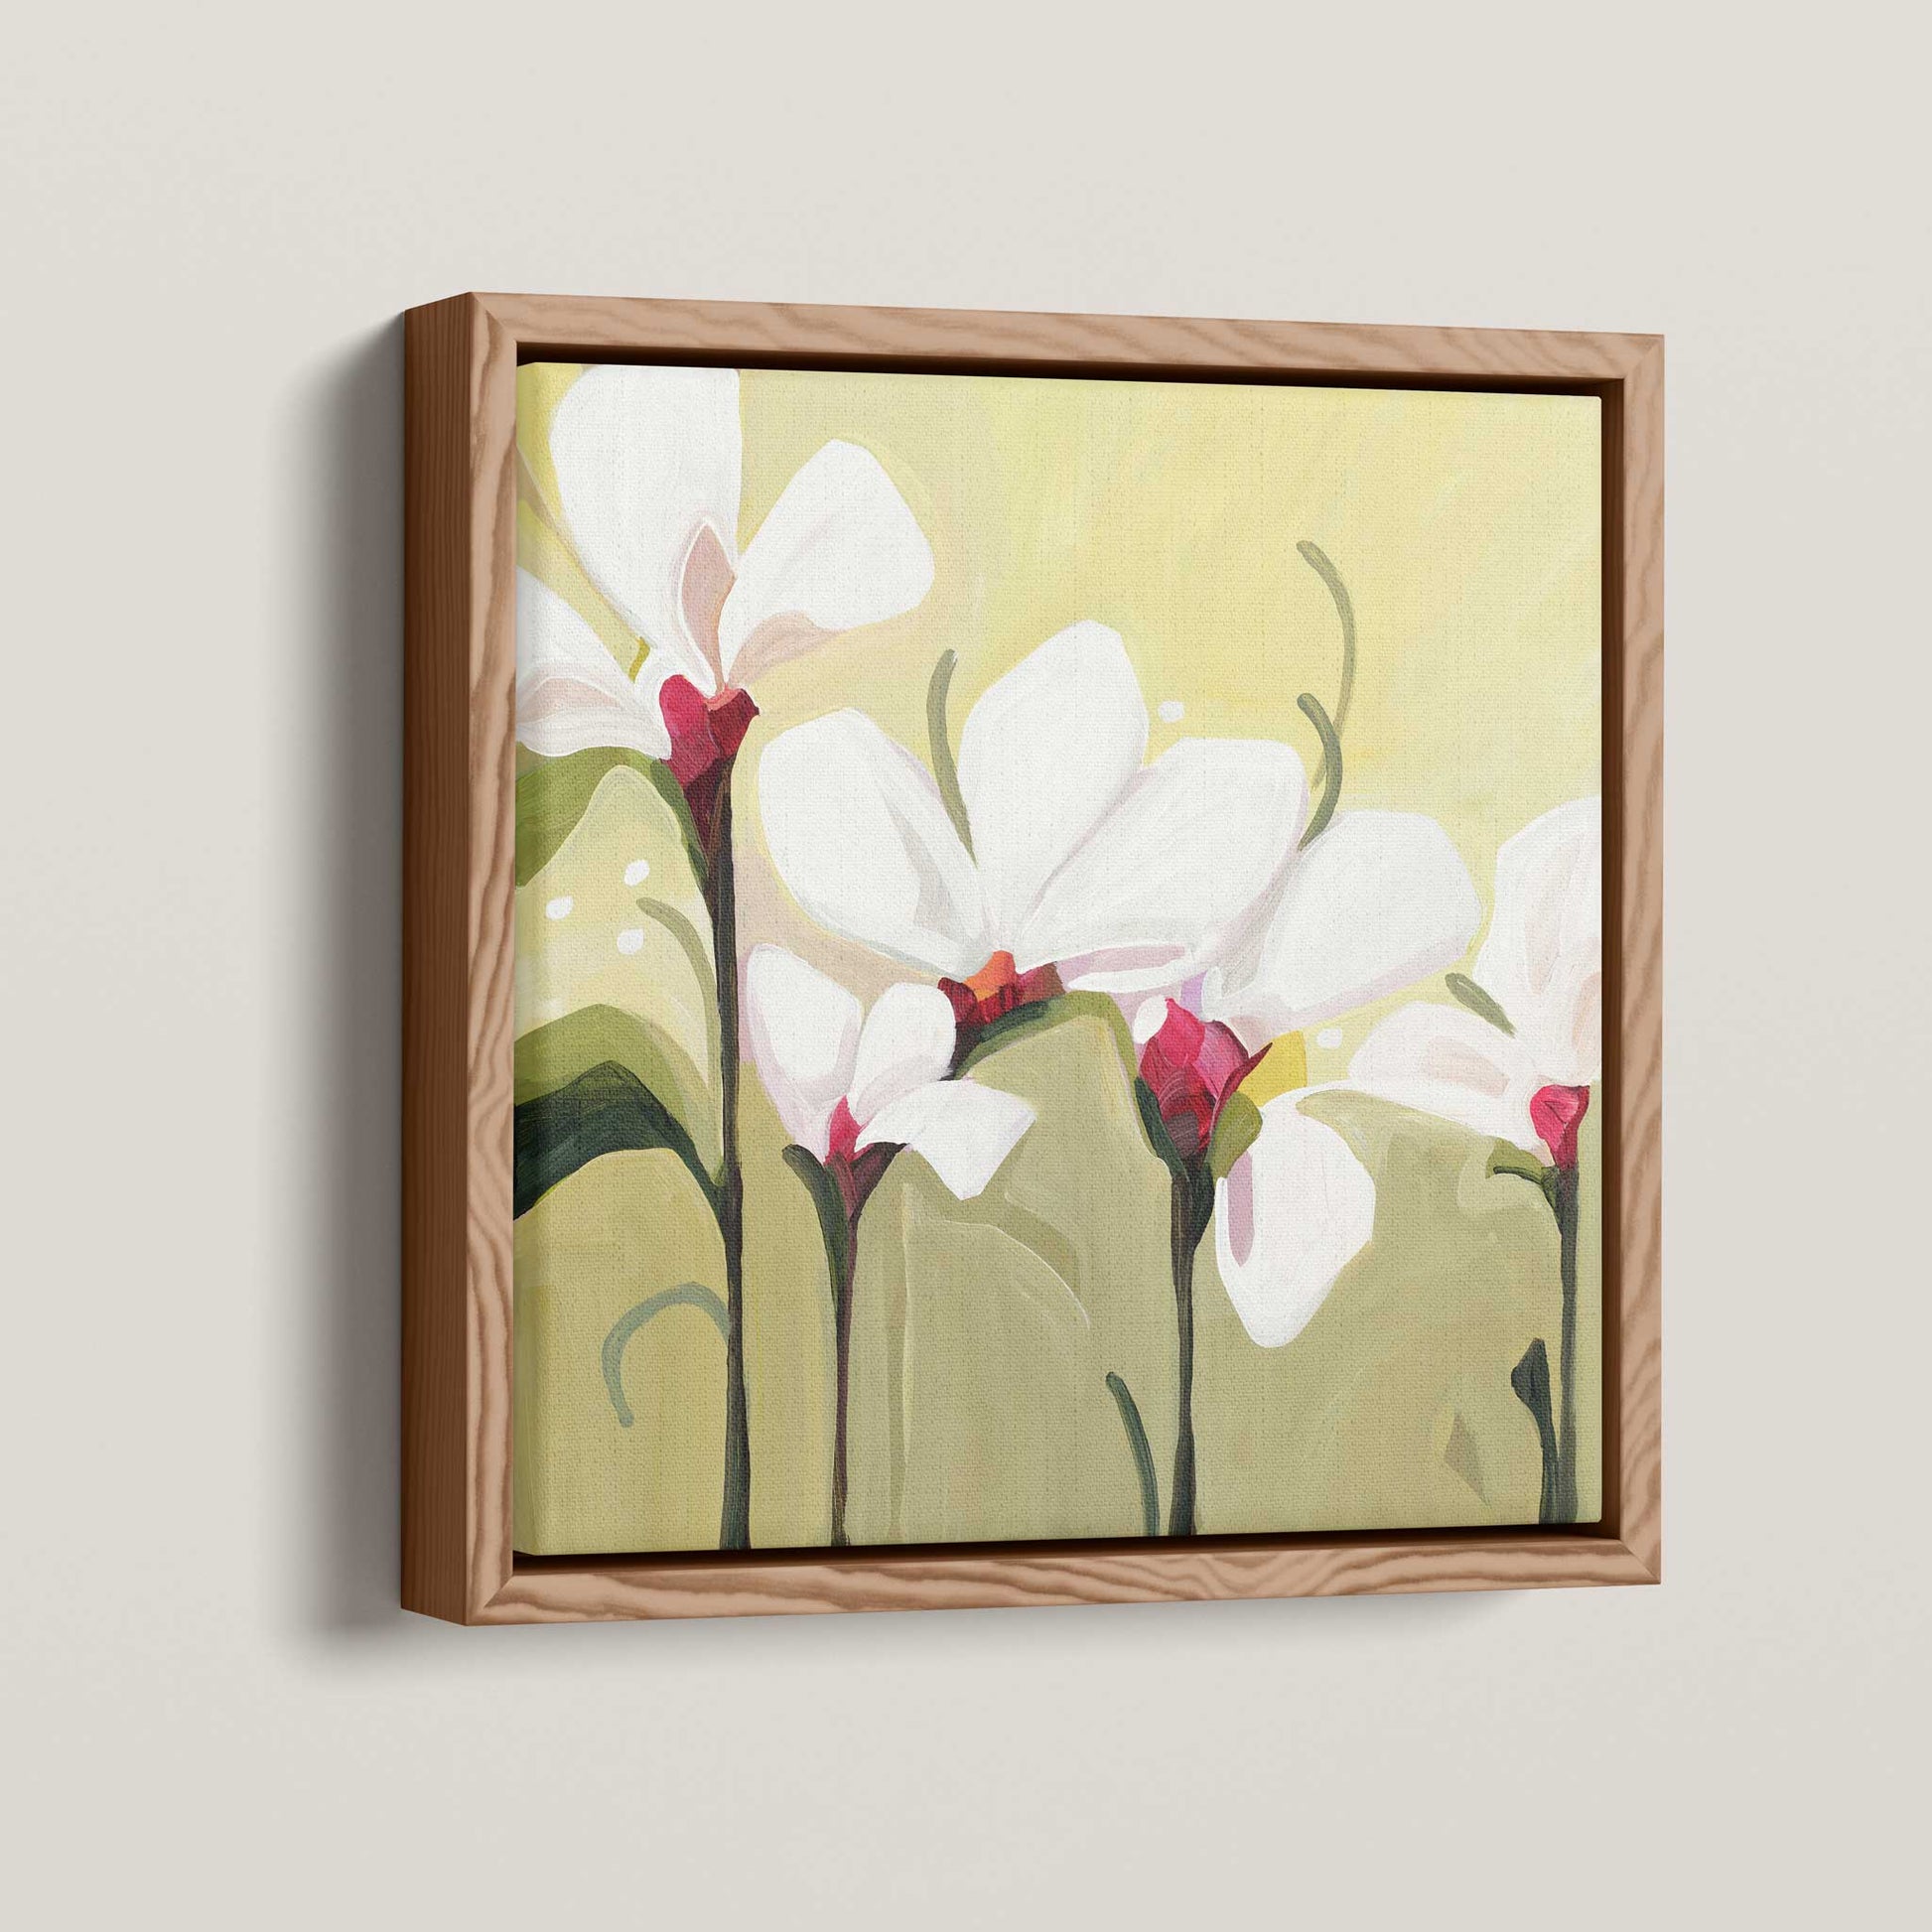 small framed acrylic flower painting with a sage green background palette and delicate white flowers